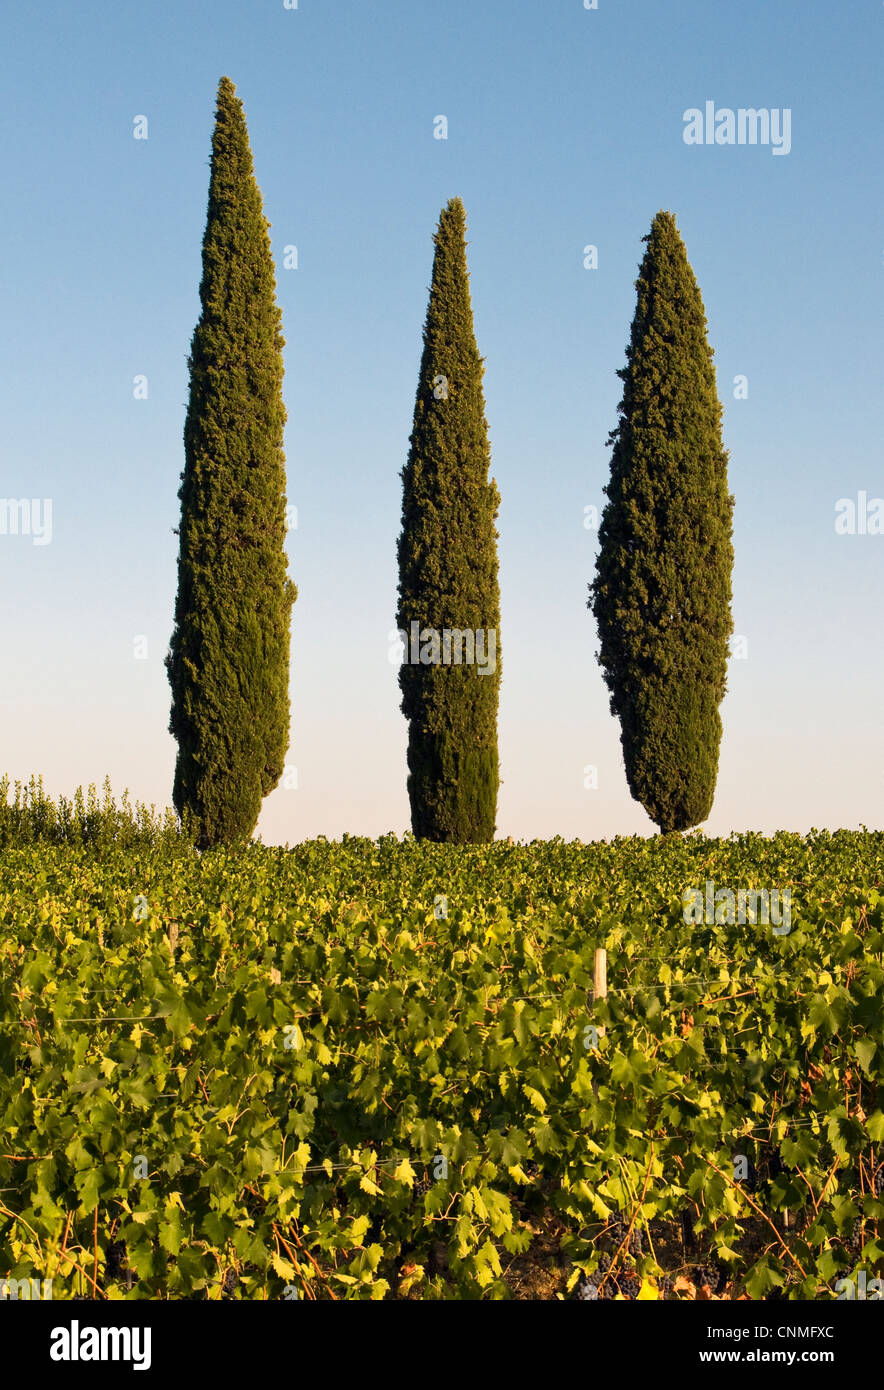 Landscape with Three Typical Mediterranean Cypress Trees (Cupressus sempervirens or Pencil Pine), Tuscany (Toscana), Italy Stock Photo